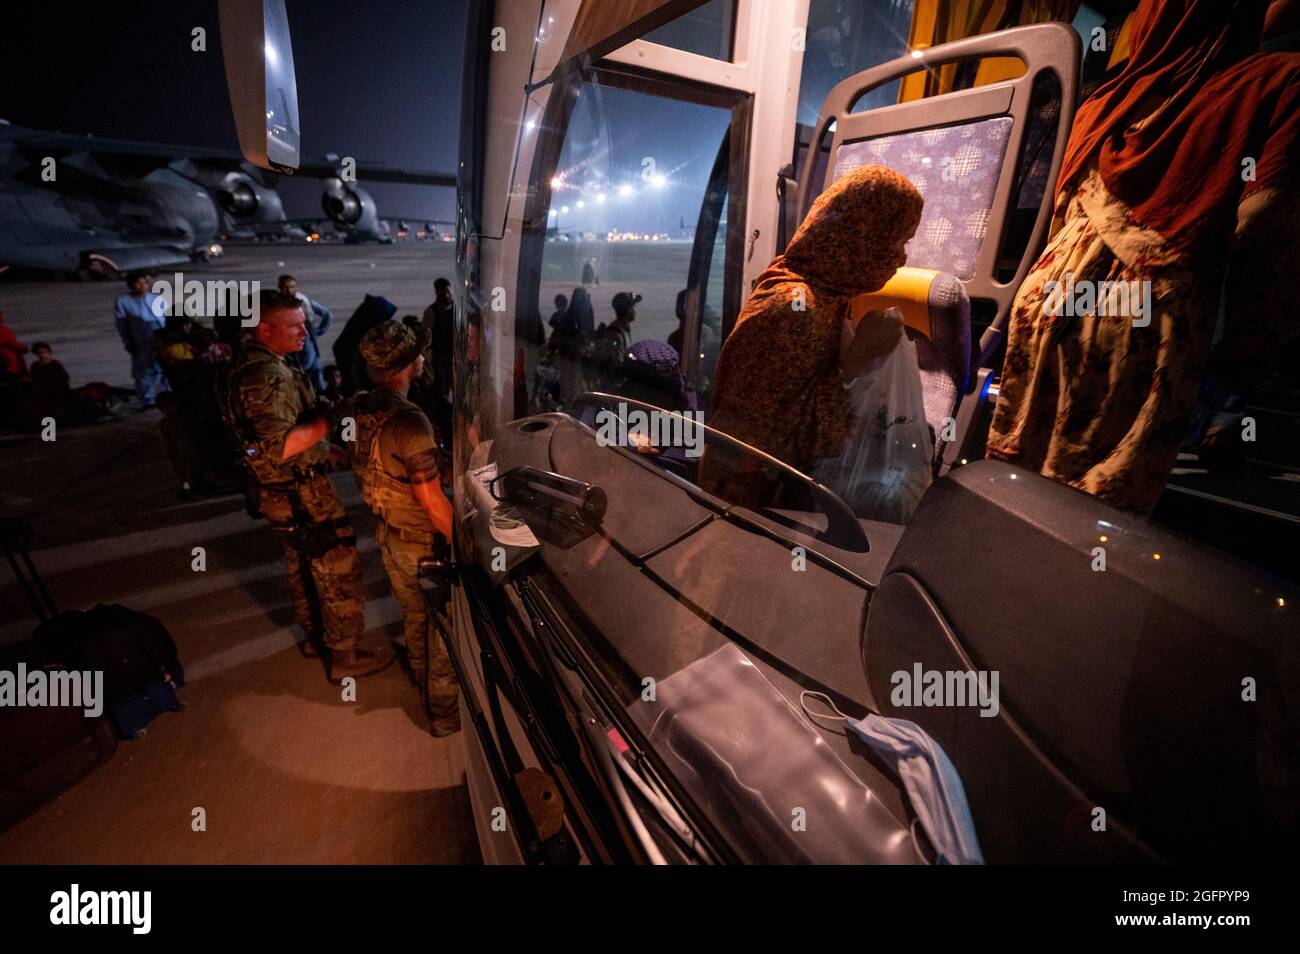 Al Udeied Air Base, Qatar. 23rd Aug, 2021. U.S. Air Force airmen assist Afghan refugees onto a bus to temporary housing on arrival from Kabul August 23, 2021 at Al Udeied Air Base, Qatar. Credit: Planetpix/Alamy Live News Stock Photo